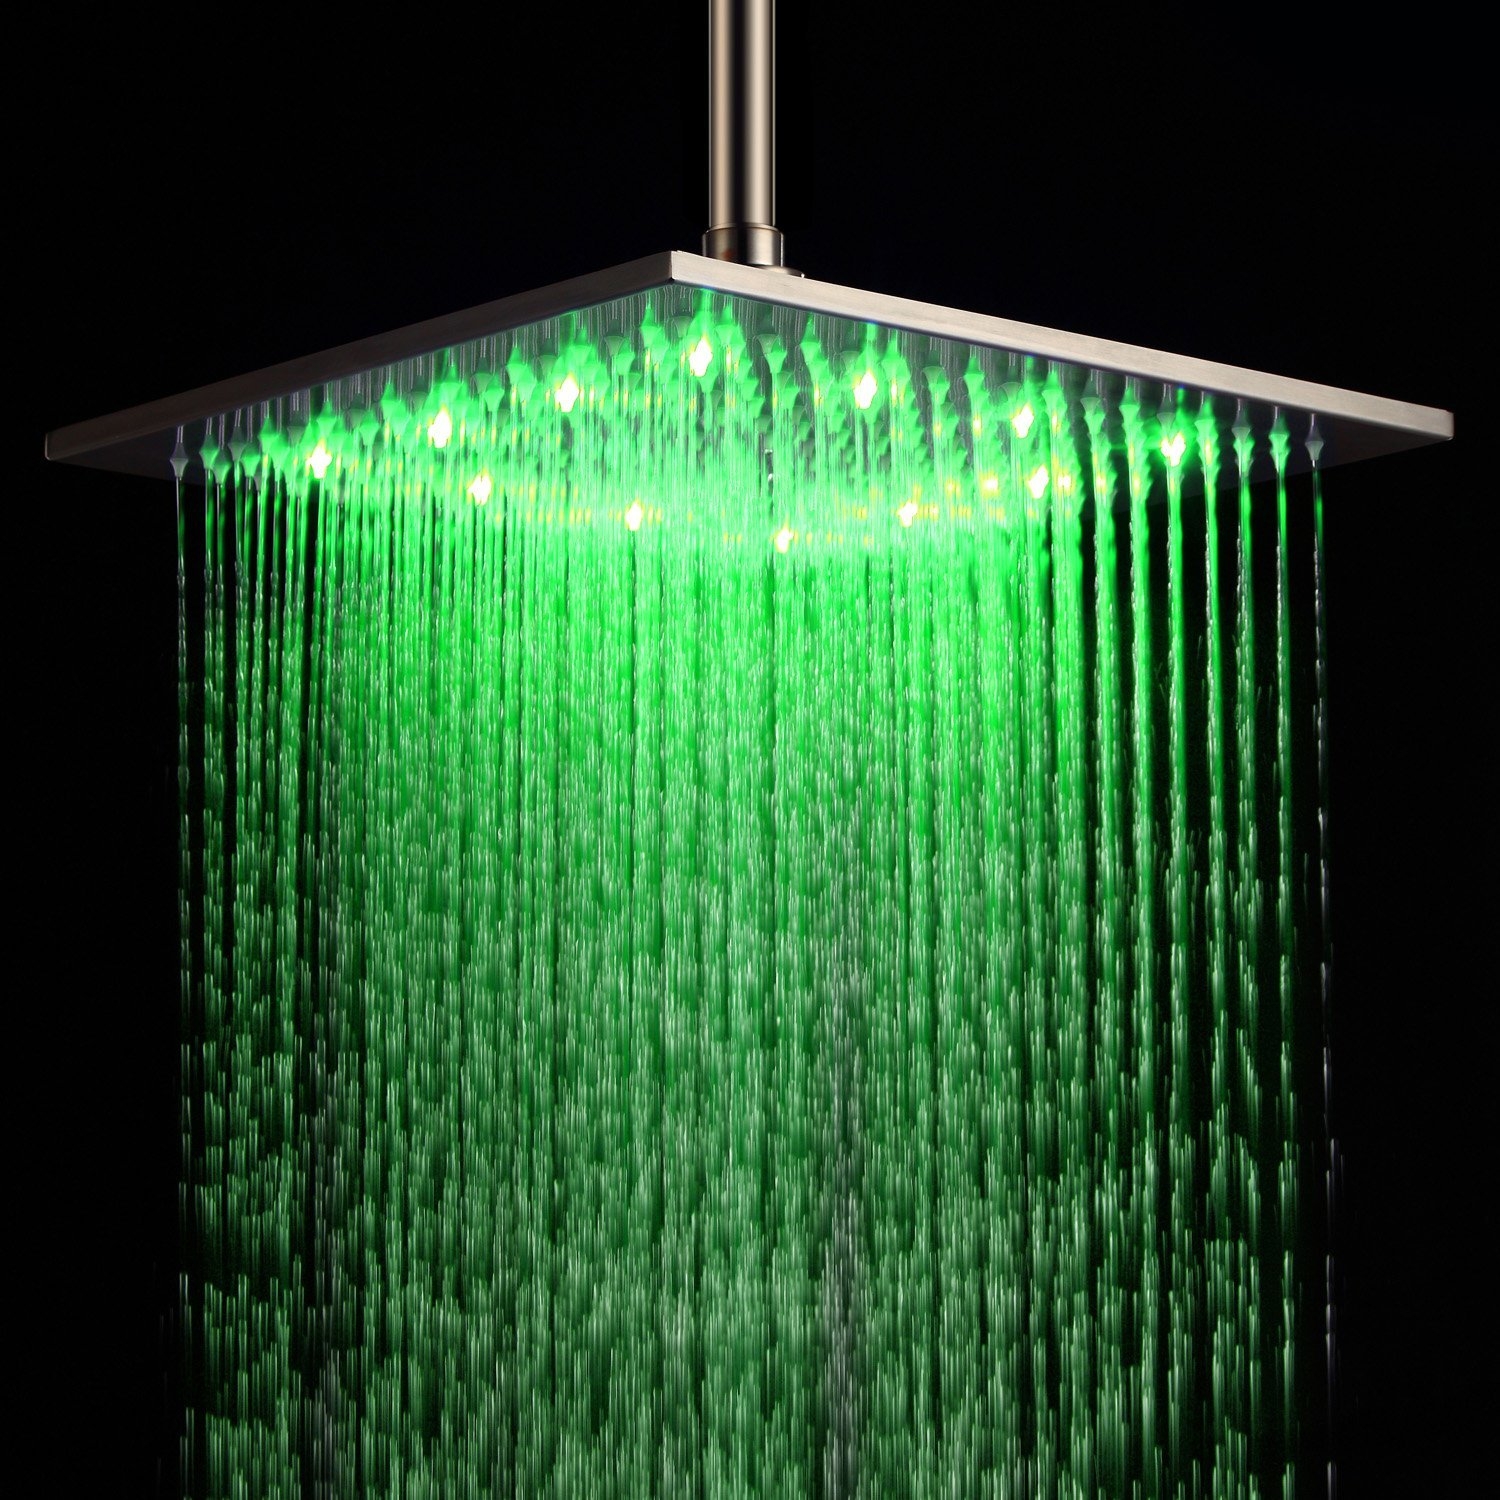 Image of 12 Inch Modern Stainless Steel Square Ceiling Mount Rain Shower Head in Brushed Nickel